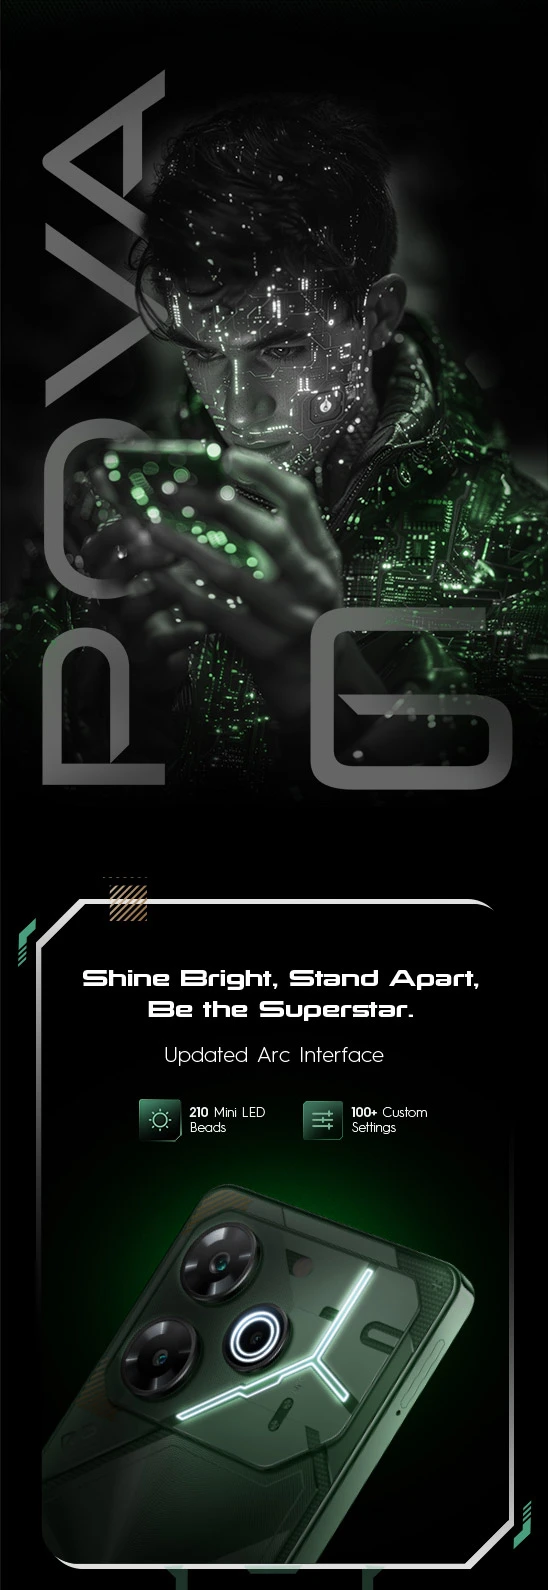 Shine bright, Stand apart and Be the superstar